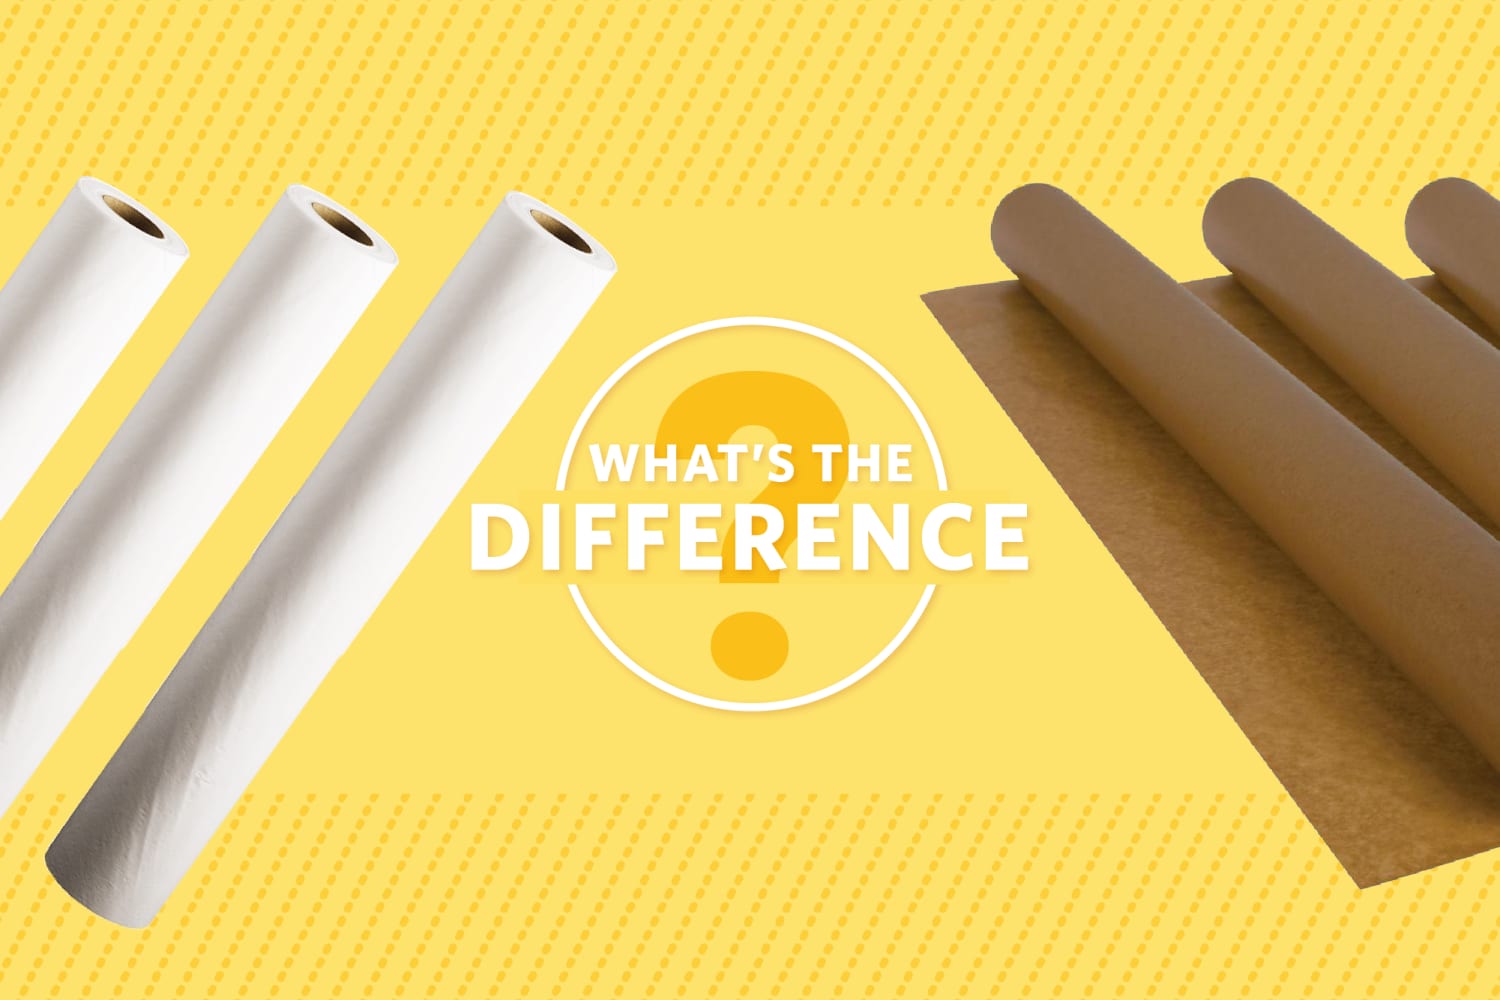 Parchment Paper vs. Wax Paper: What's the Difference?